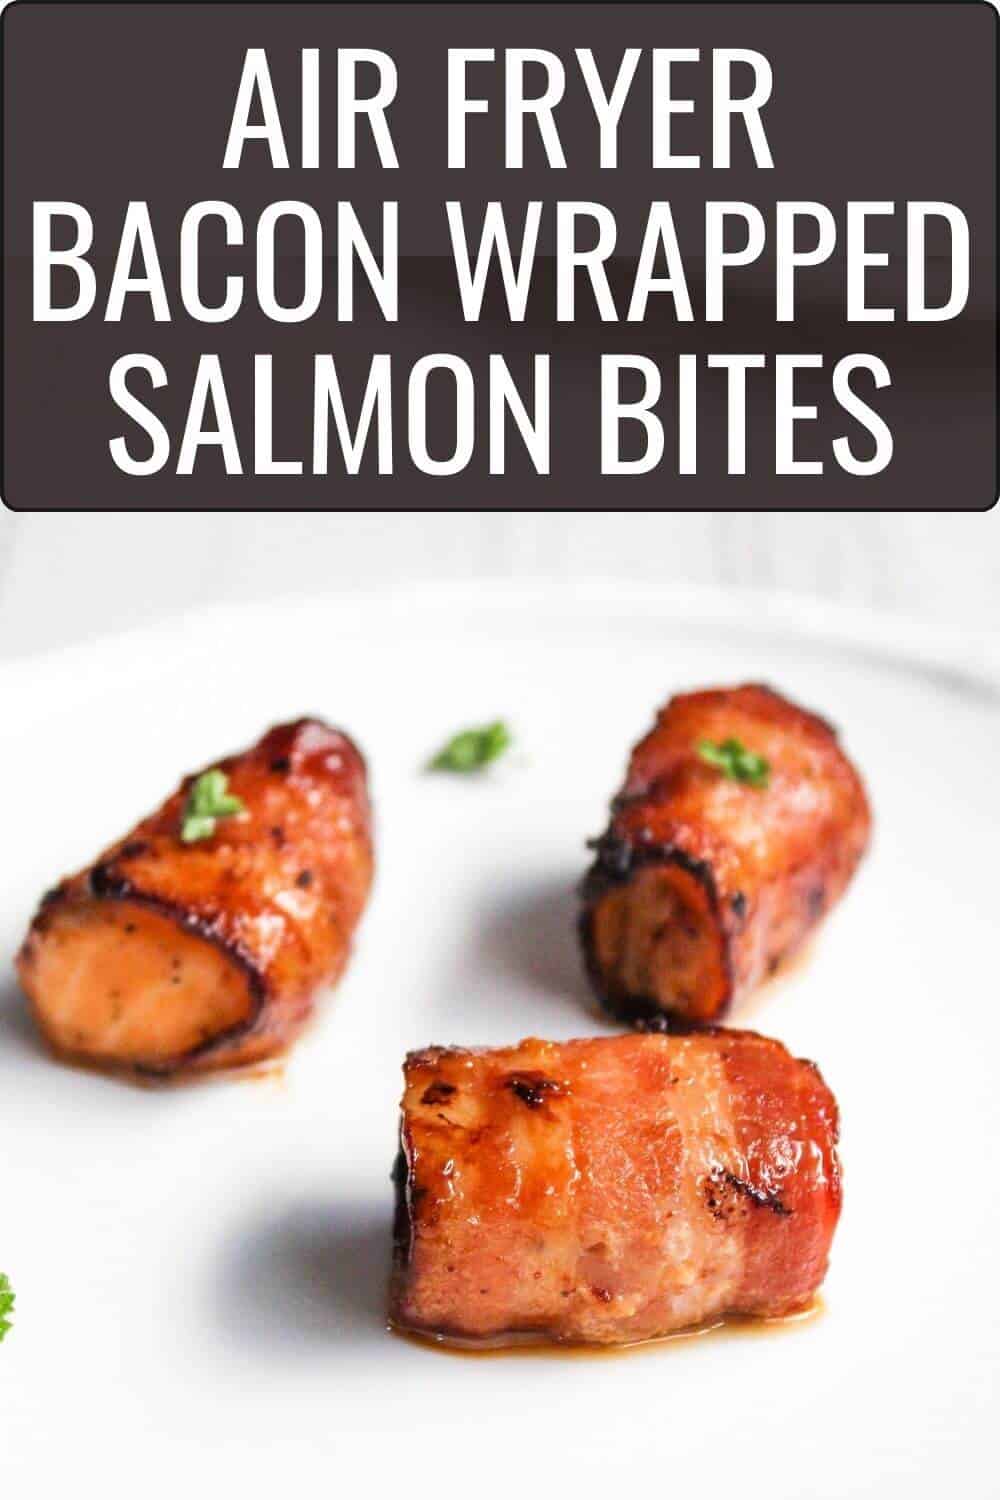 Air fryer bacon wrapped salmon bites offer a delicious and healthy twist on the classic combination of bacon and salmon.